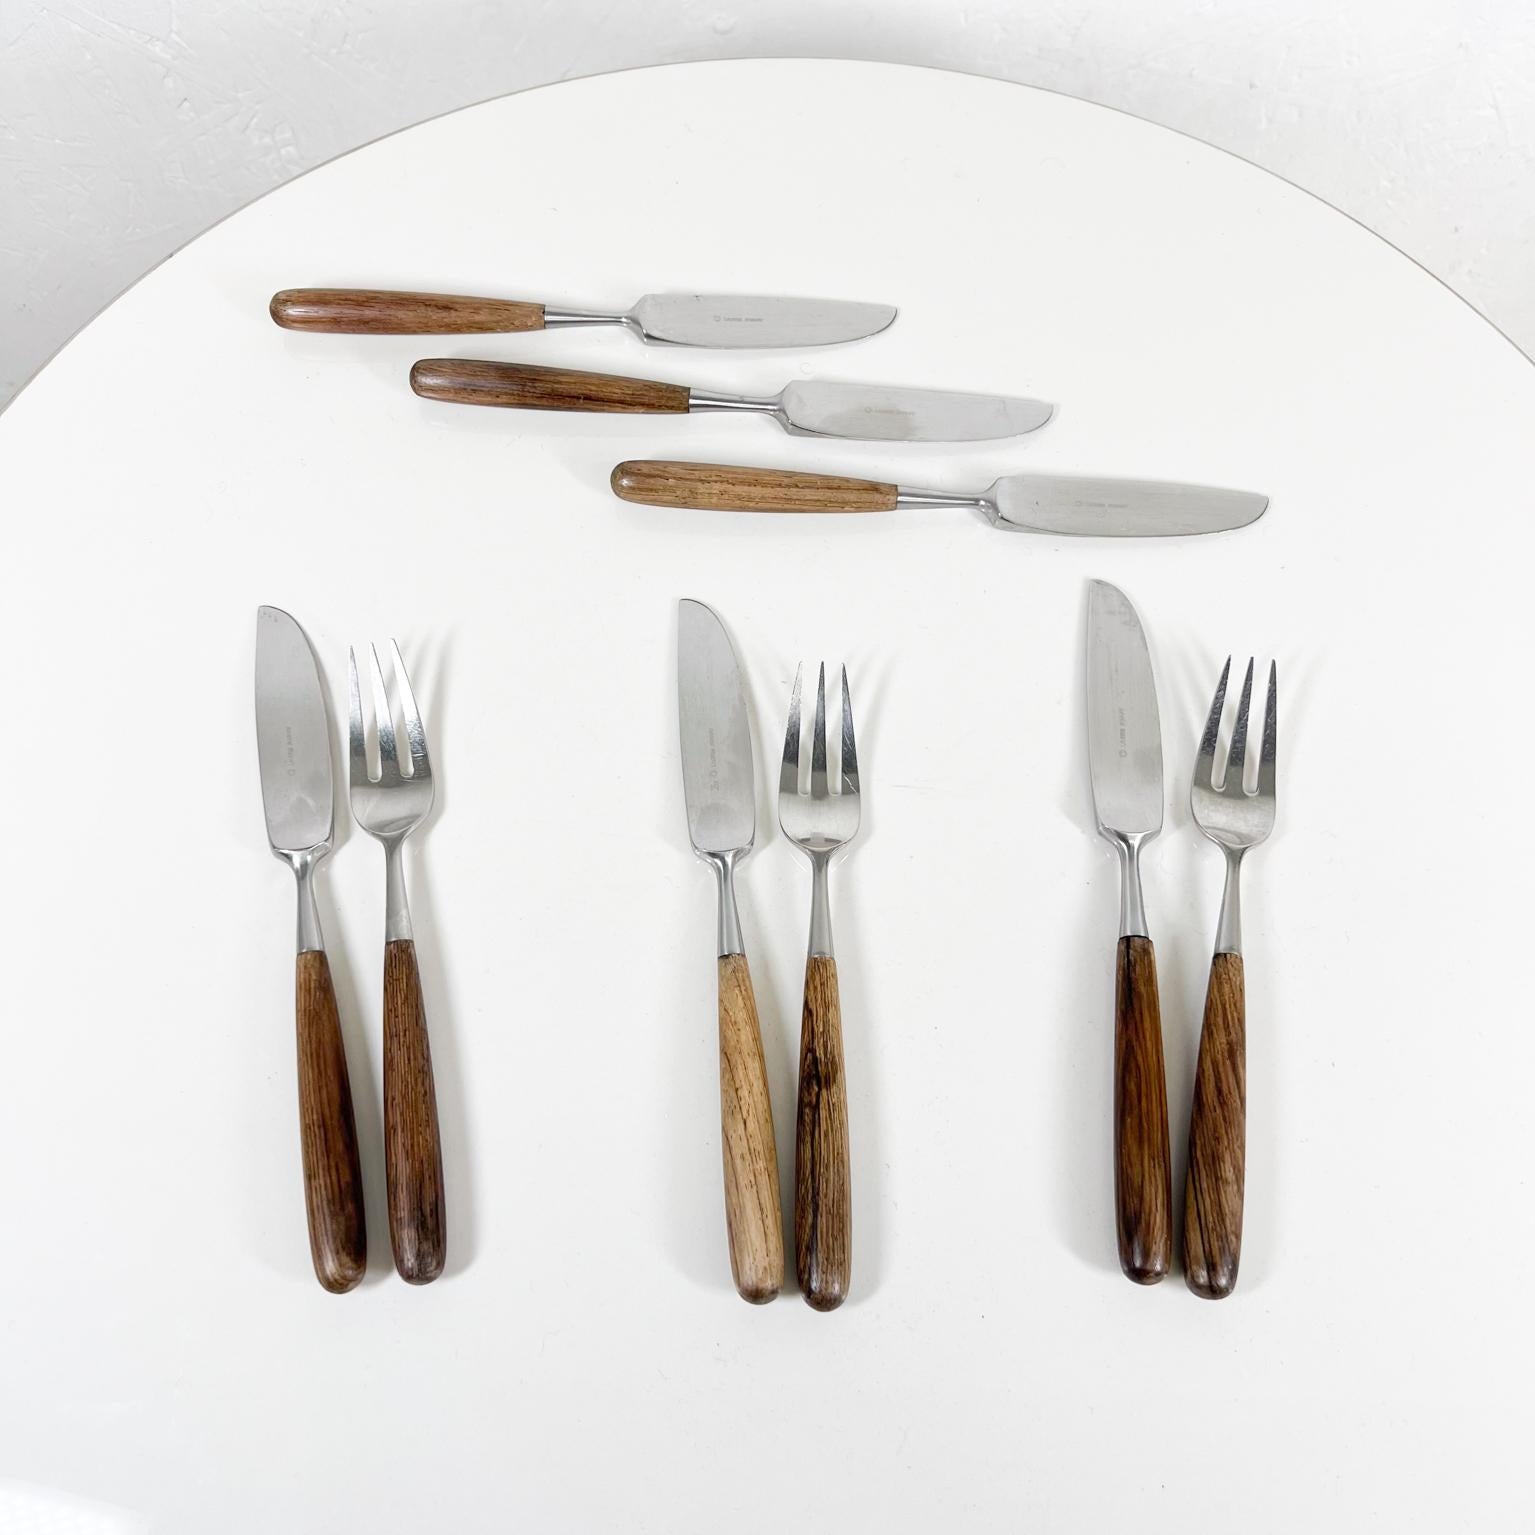 Lauffer Norway Palisander Stainless Flatware Set of Three Forks Six Knives
Stamped Lauffer Norway
Palisander (rosewood) and Stainless-Steel Flatware
Set of 6 knives + 3 forks.
Knives 8.5 long x 1 w x .5 d
Fork 7.38 long x 1 w x .5
Preowned